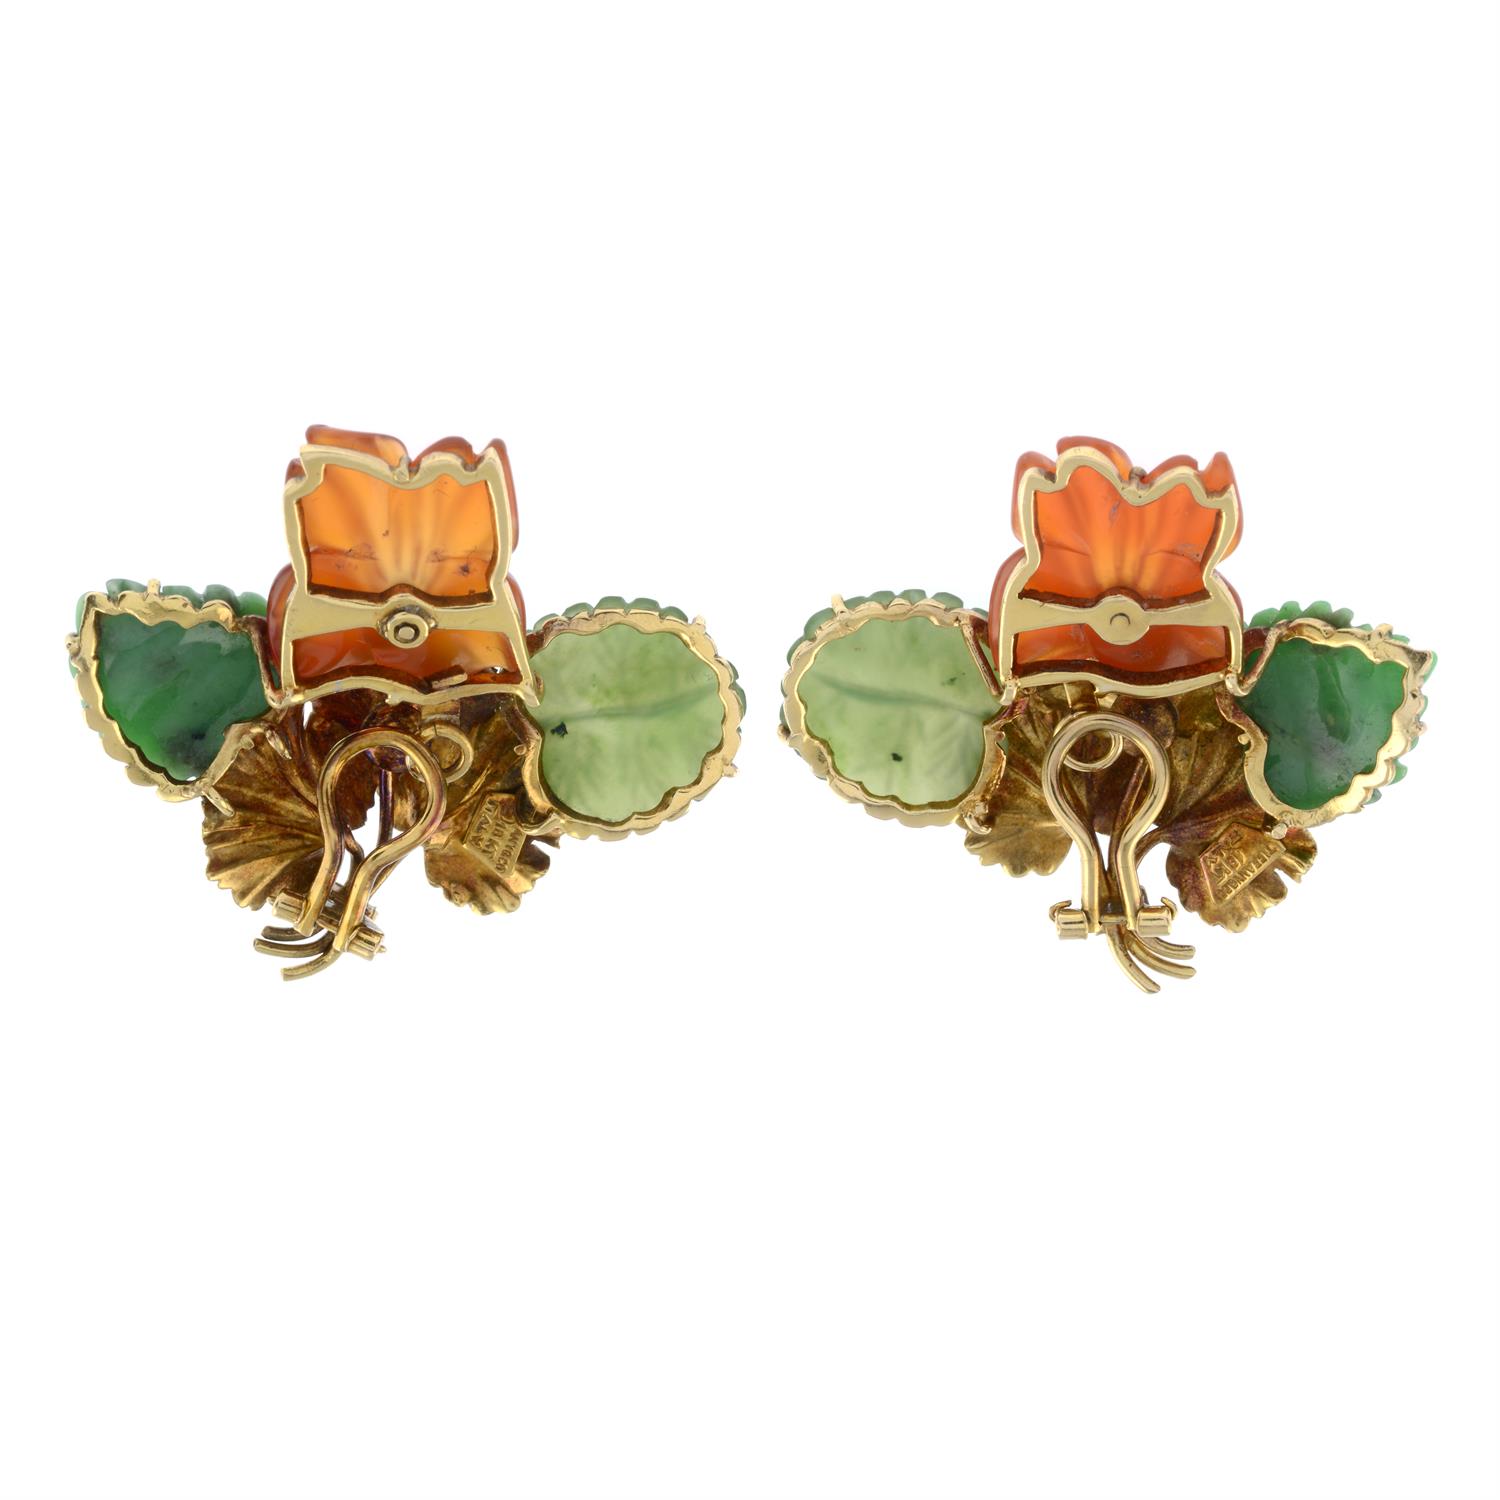 18ct gold diamond and gem earrings, by Tiffany & Co. - Image 3 of 3